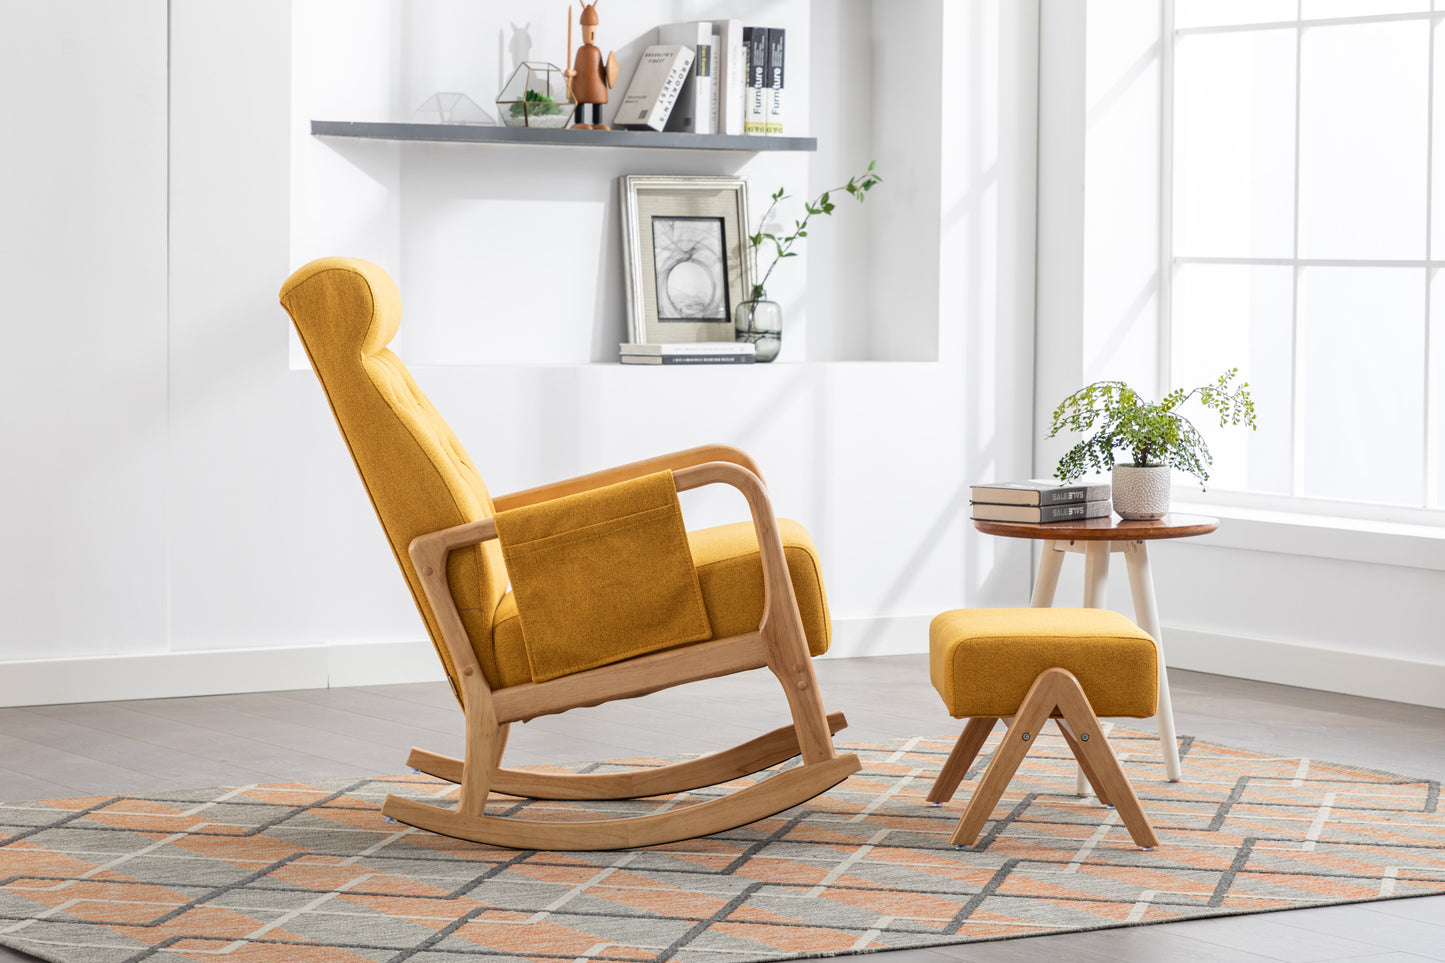 COOLMORE Rocking Chair With Ottoman, Mid-Century Modern Upholstered Fabric Rocking Armchair, Rocking Chair Nursery with Thick Padded Cushion, High Backrest Accent Glider Rocker Chair for Living Room